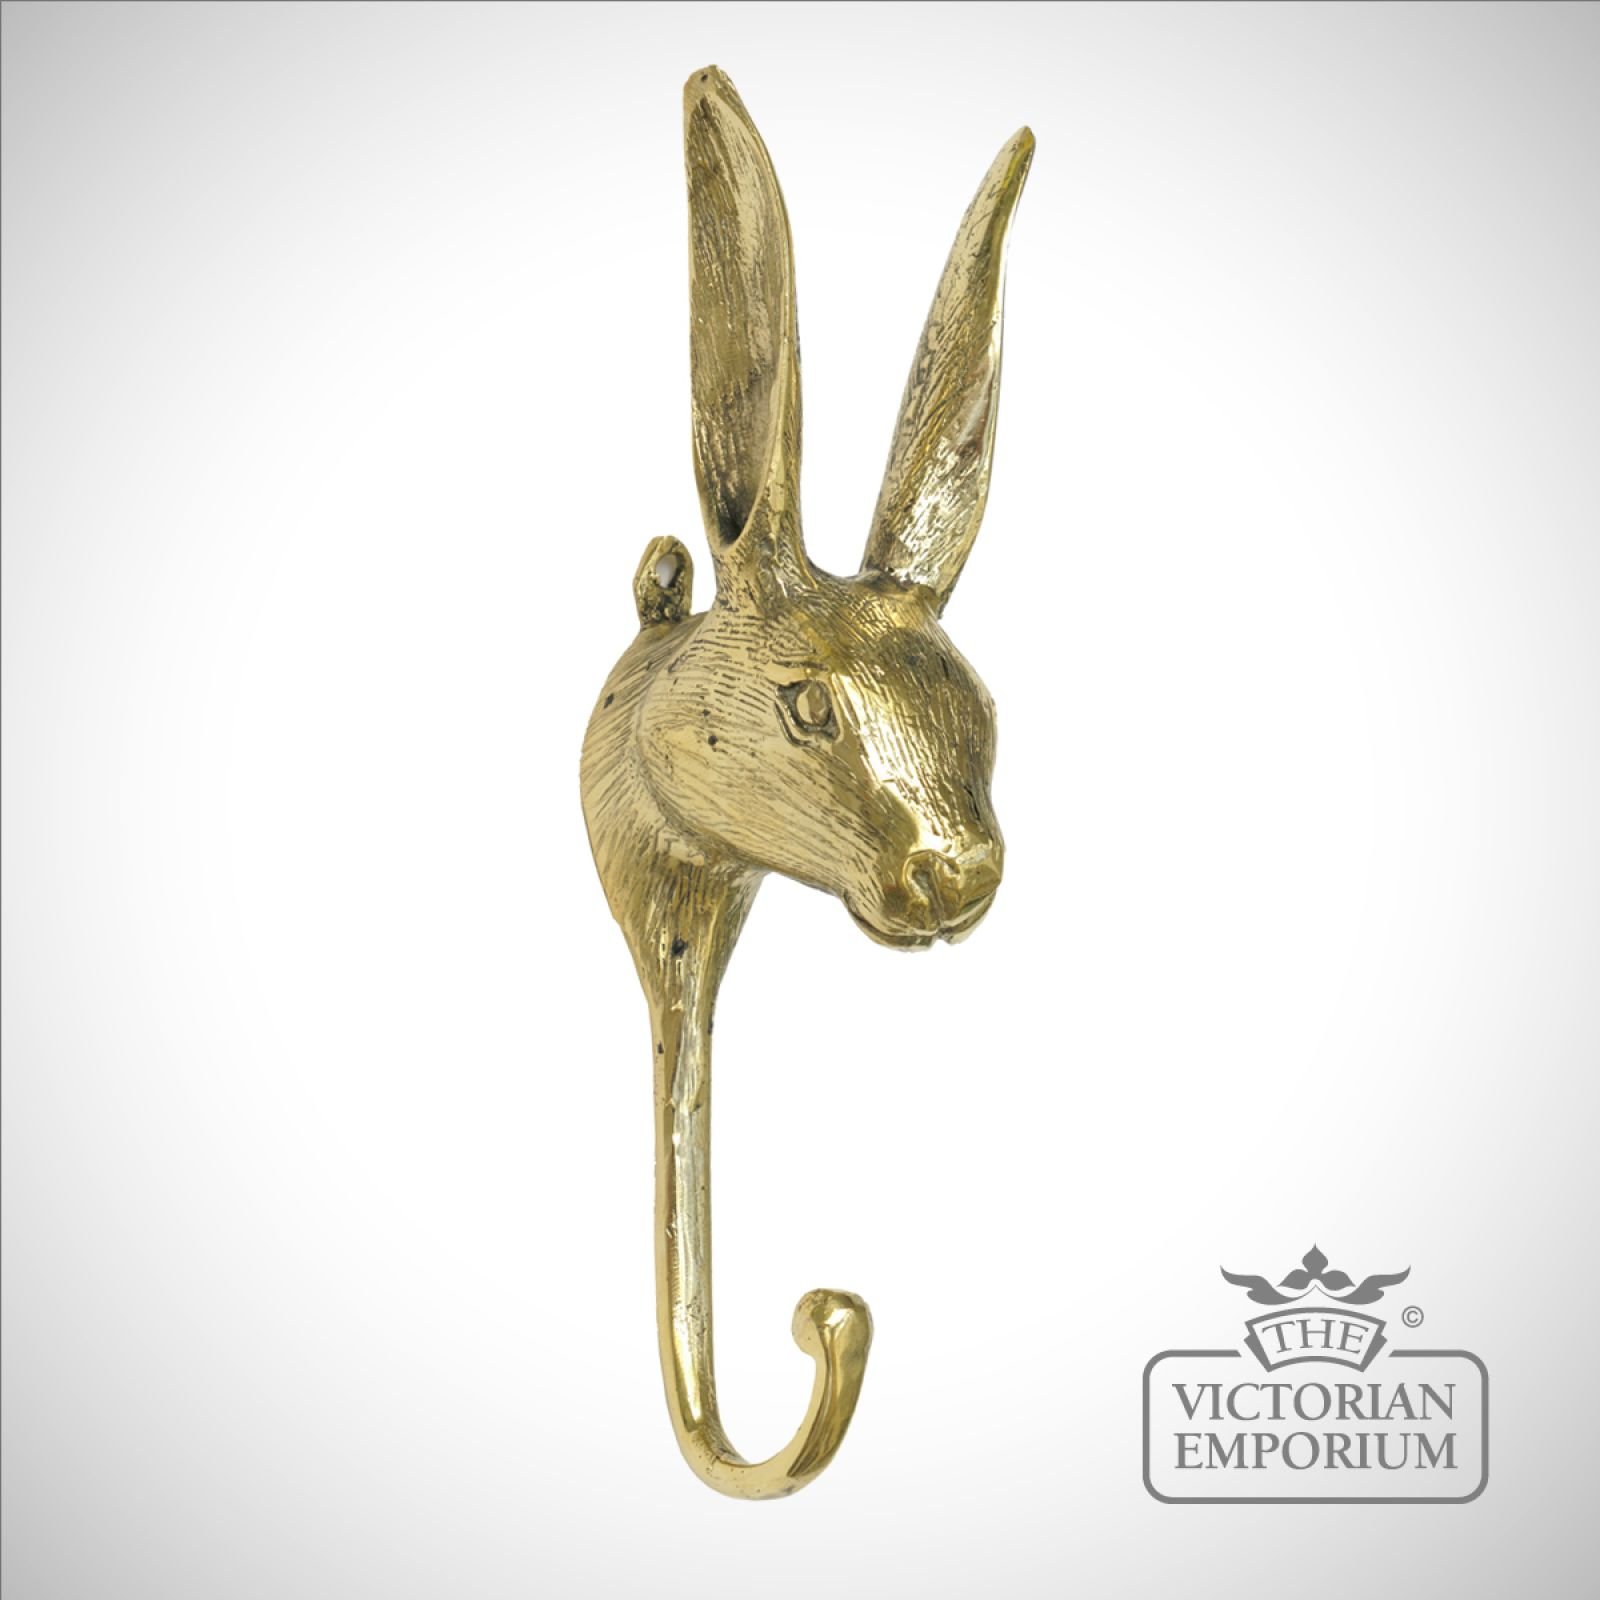 Rabbit hook in polished brass or antique brass